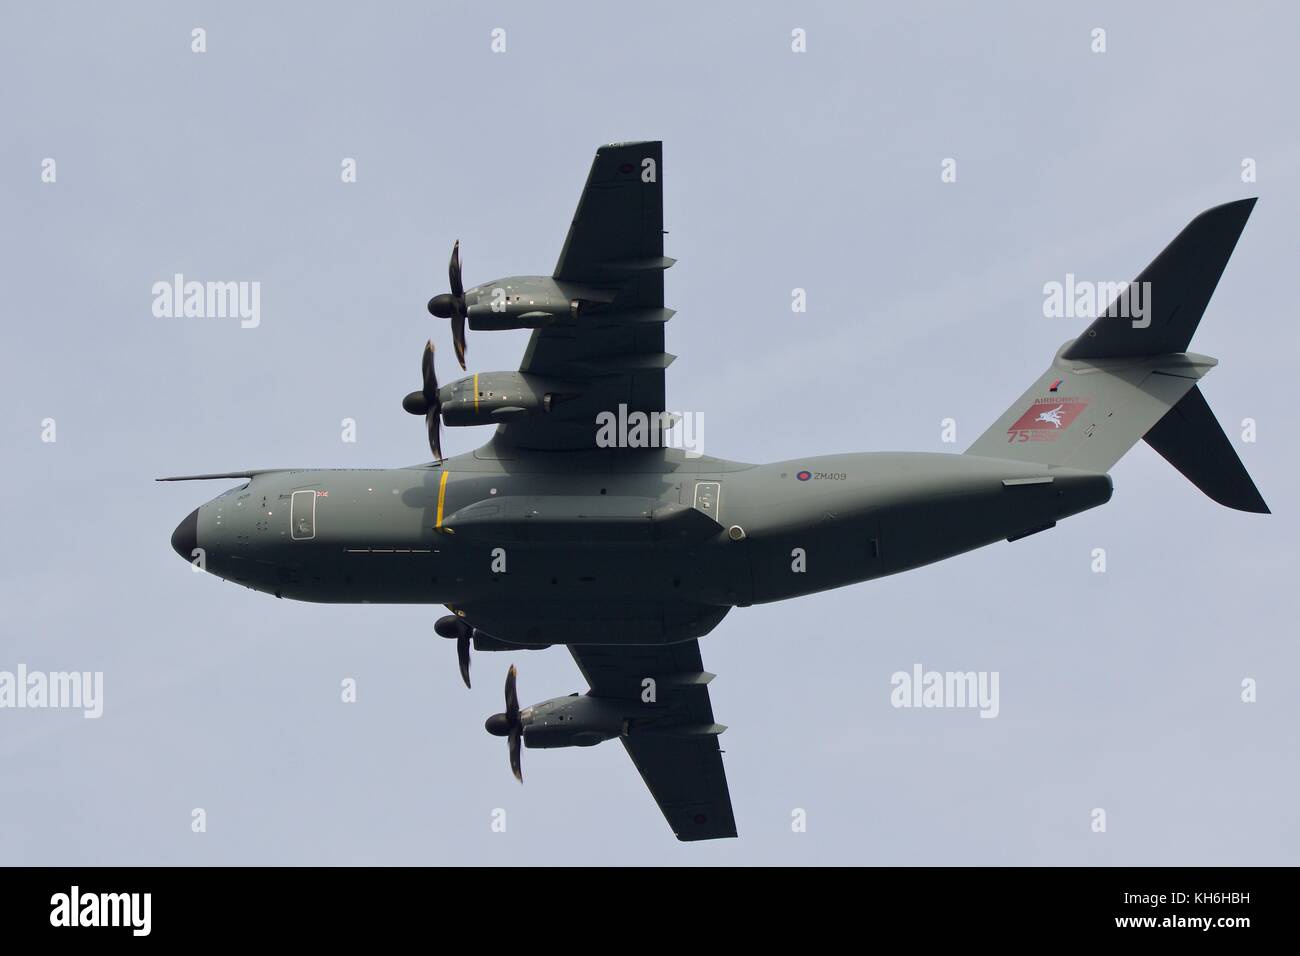 Royal Air Force Atlas Airbus A-400M is a four engined turboprop military transport aircraft. Seen at Dartmouth Royal Regatta UK.Thurs 24th August 2017 Stock Photo